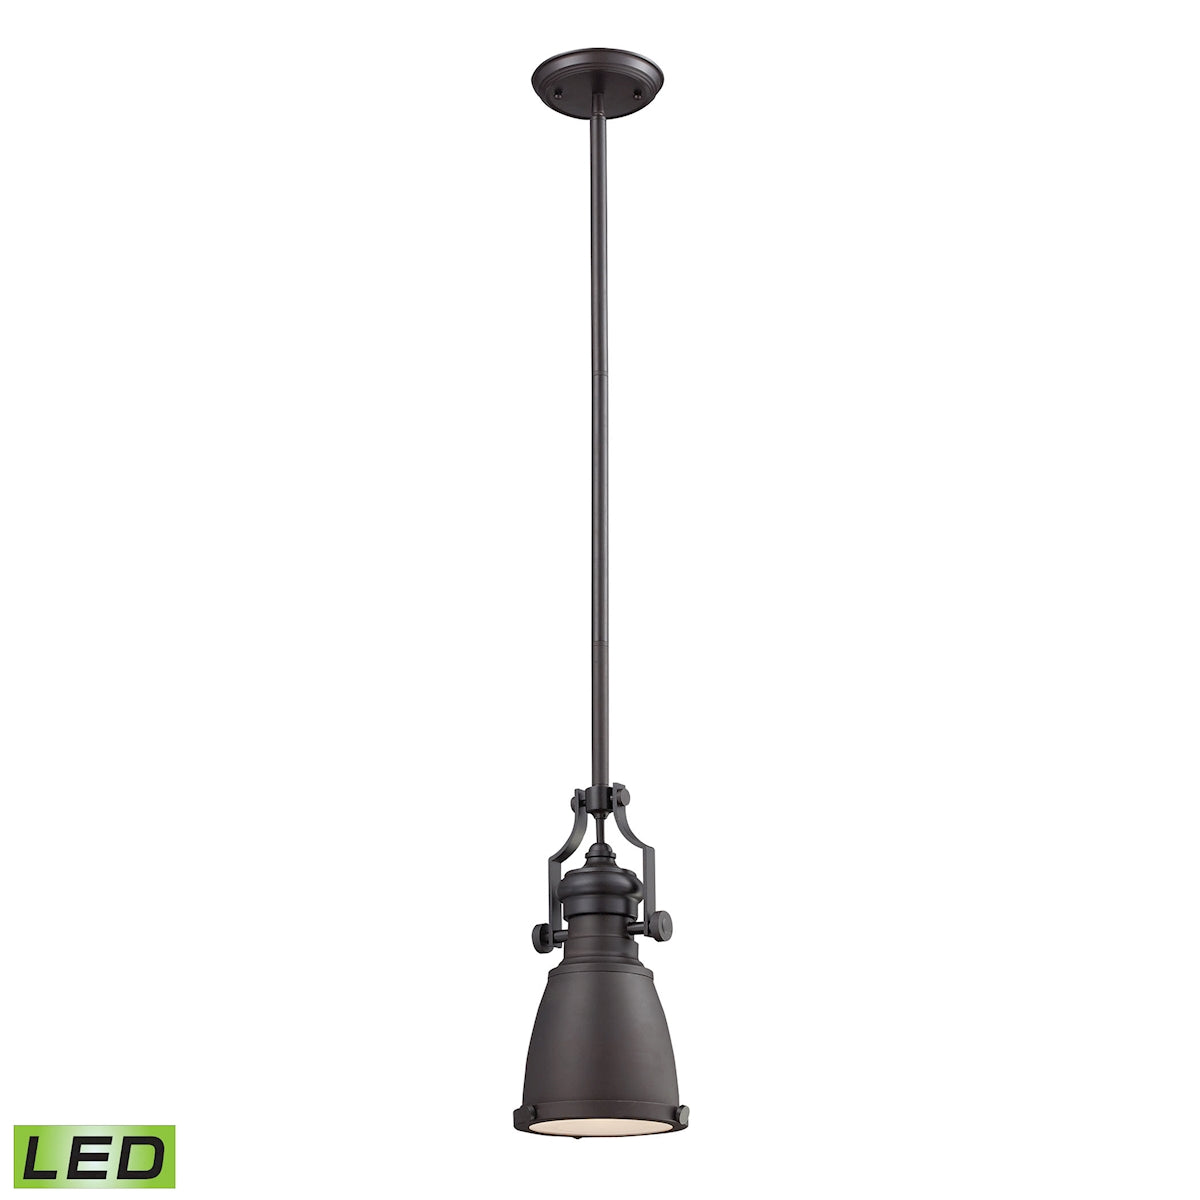 ELK Lighting 66139-1-LED Chadwick 1-Light Mini Pendant in Oiled Bronze with Matching Shade - Includes LED Bulb